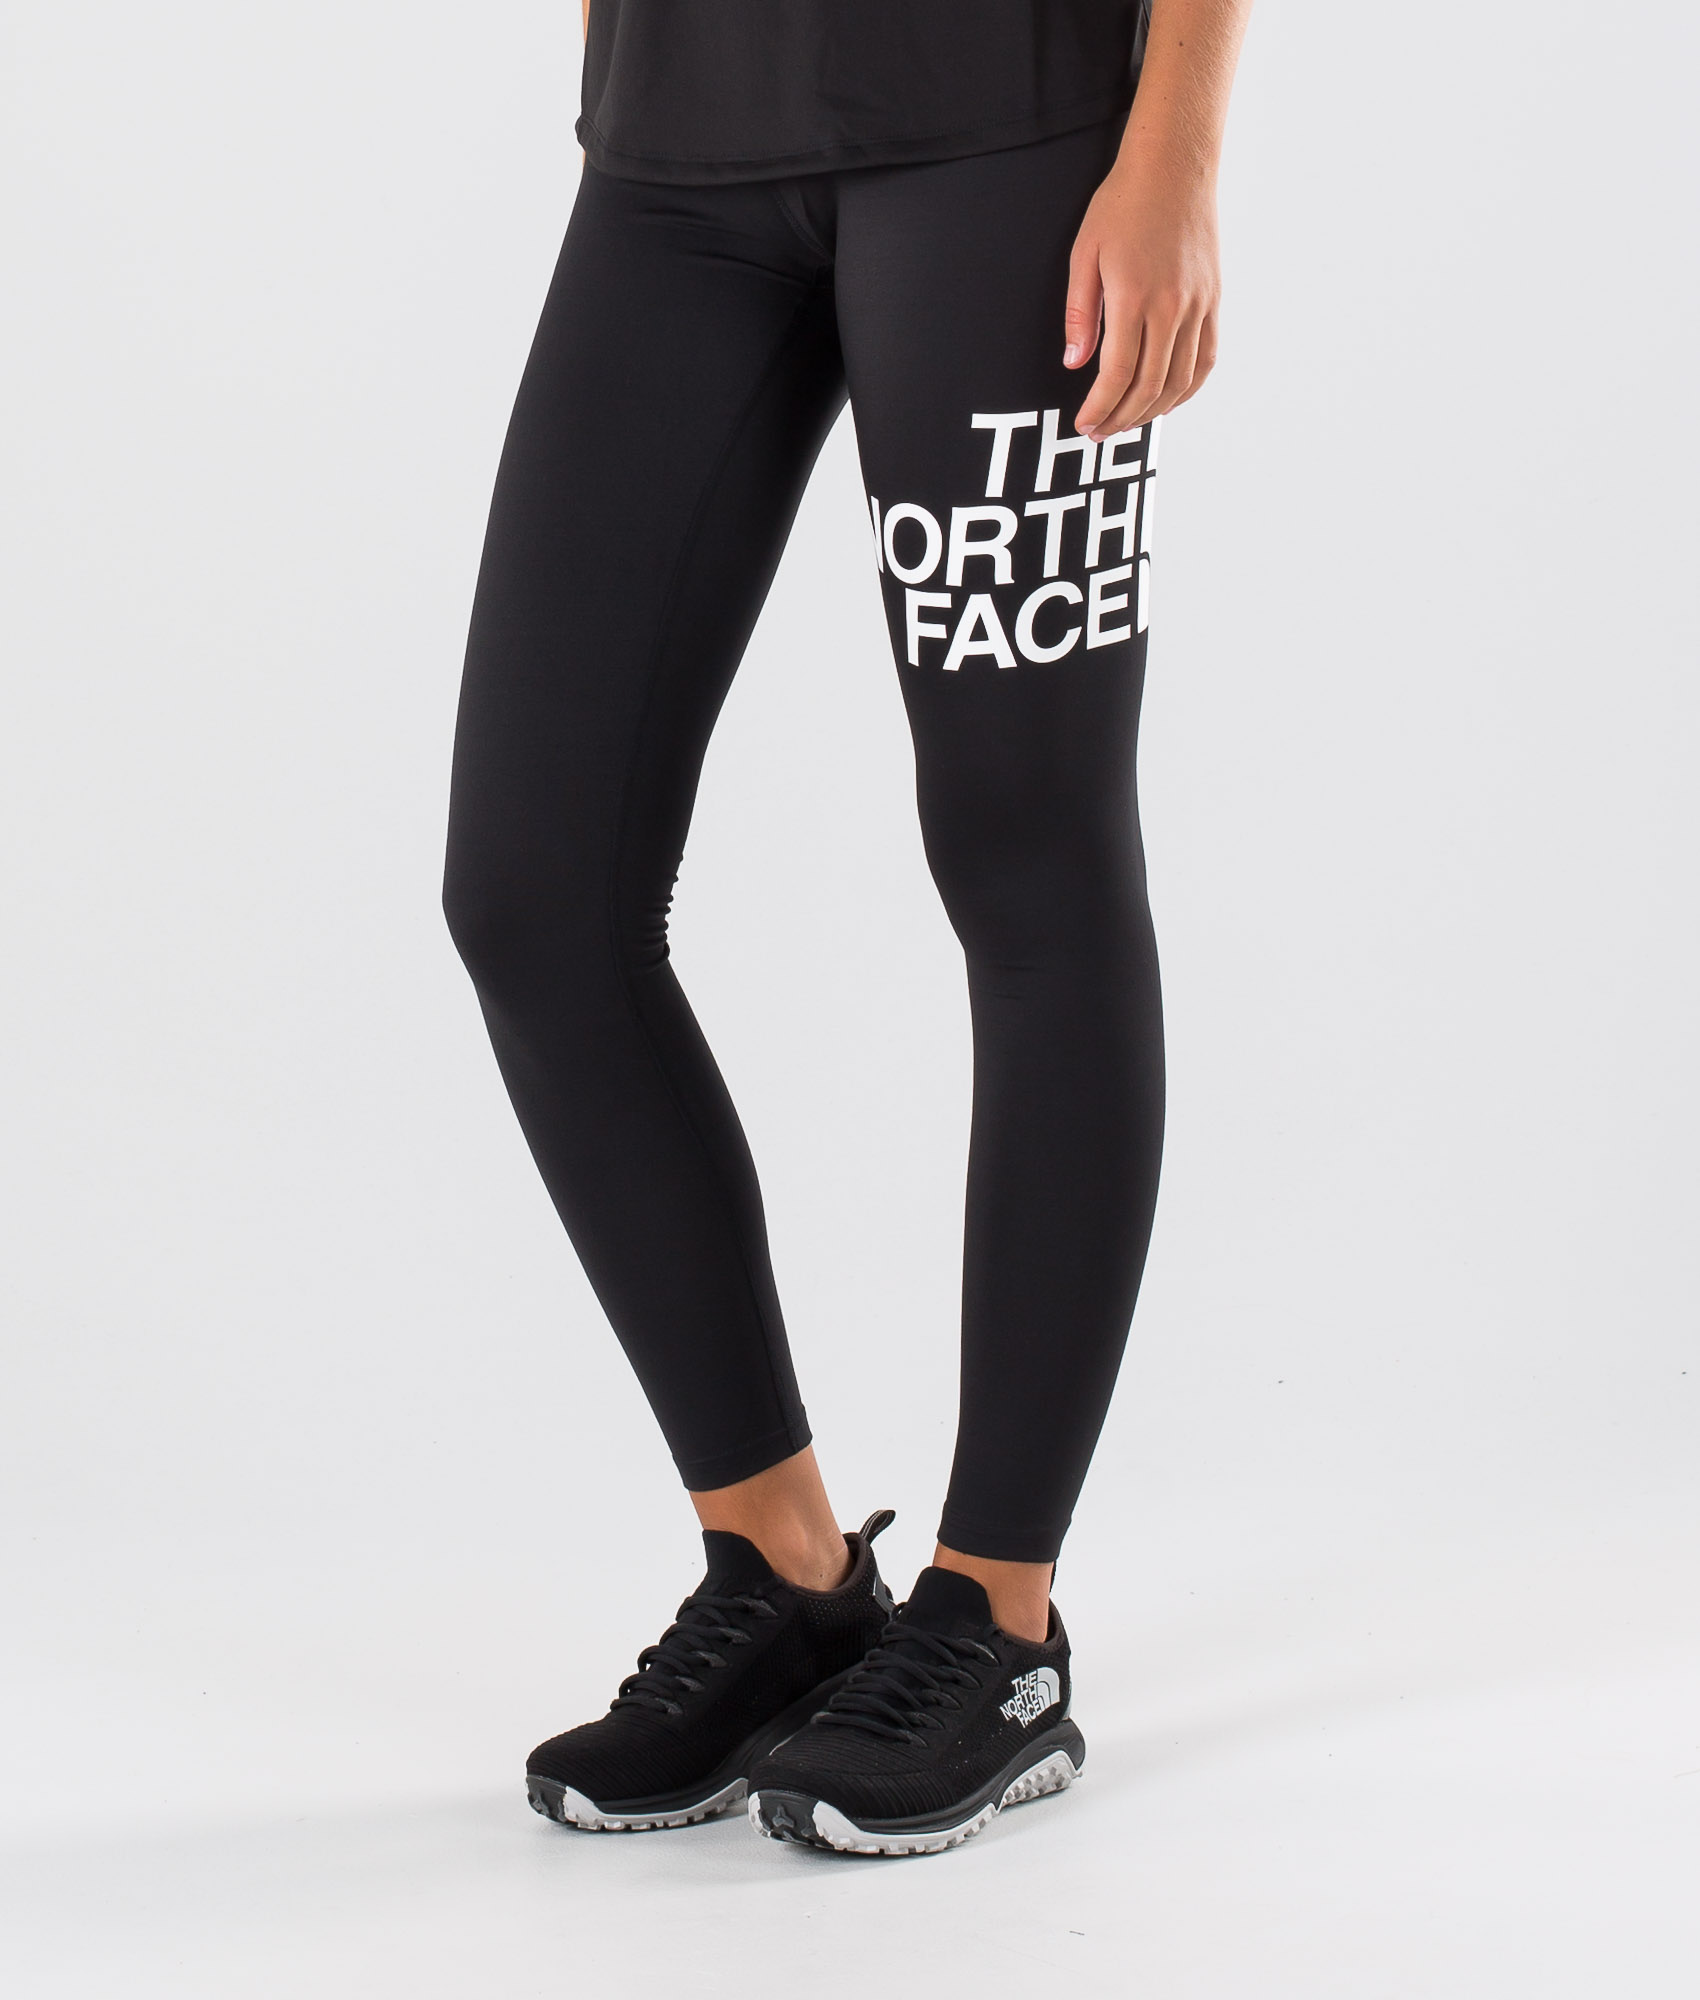 THE NORTH FACE LEGGINGS